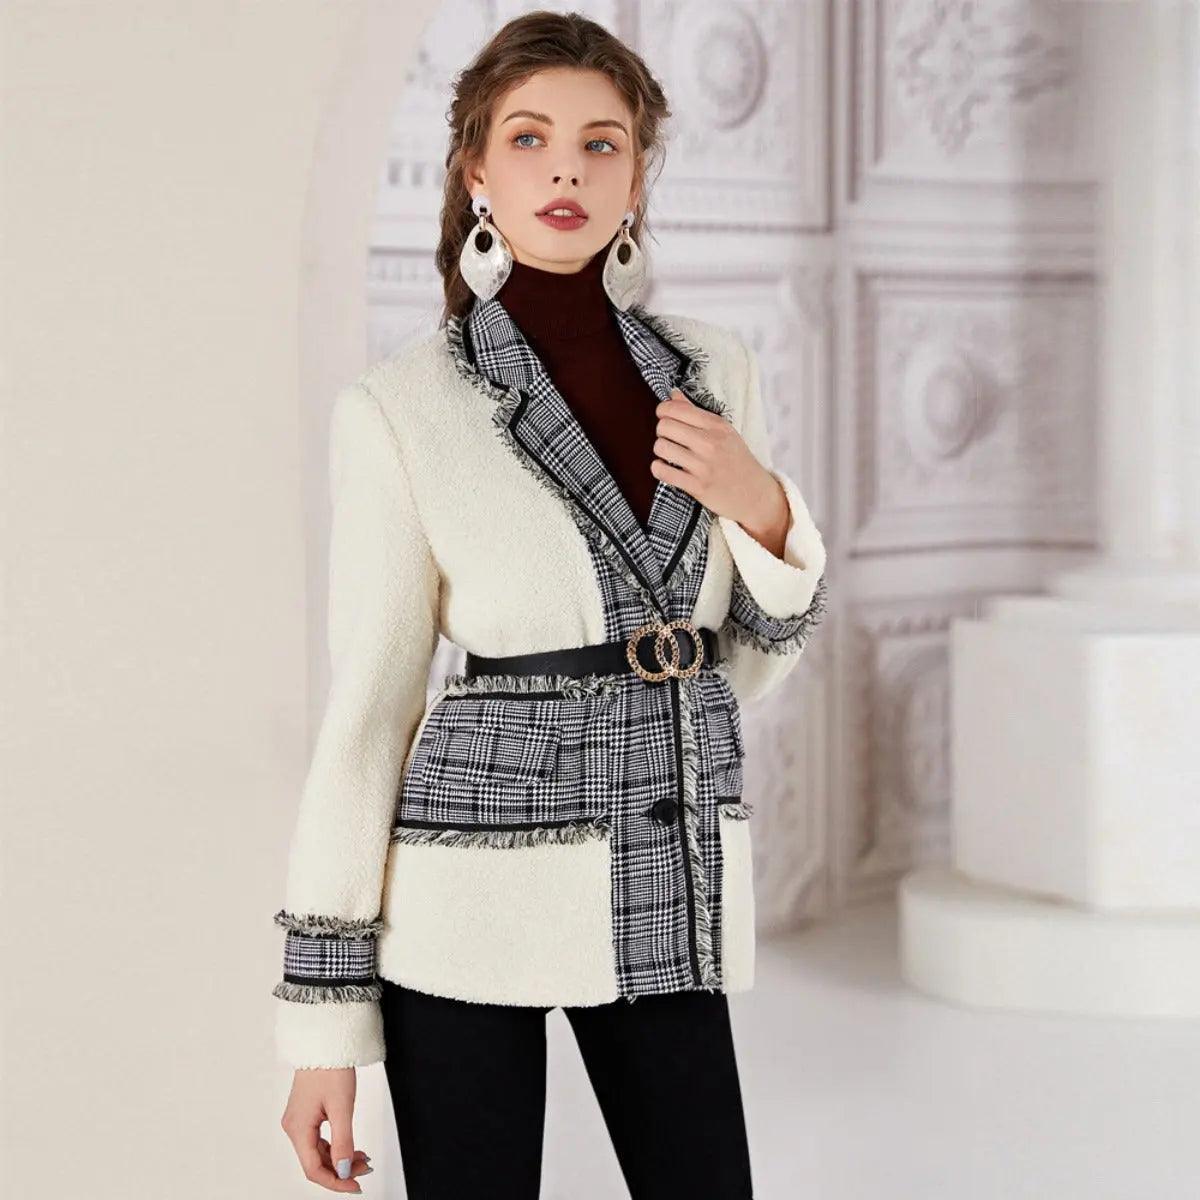 MS009 Lambswool Formal Suit Long Sleeve Blouse Coat - Mariam's Collection